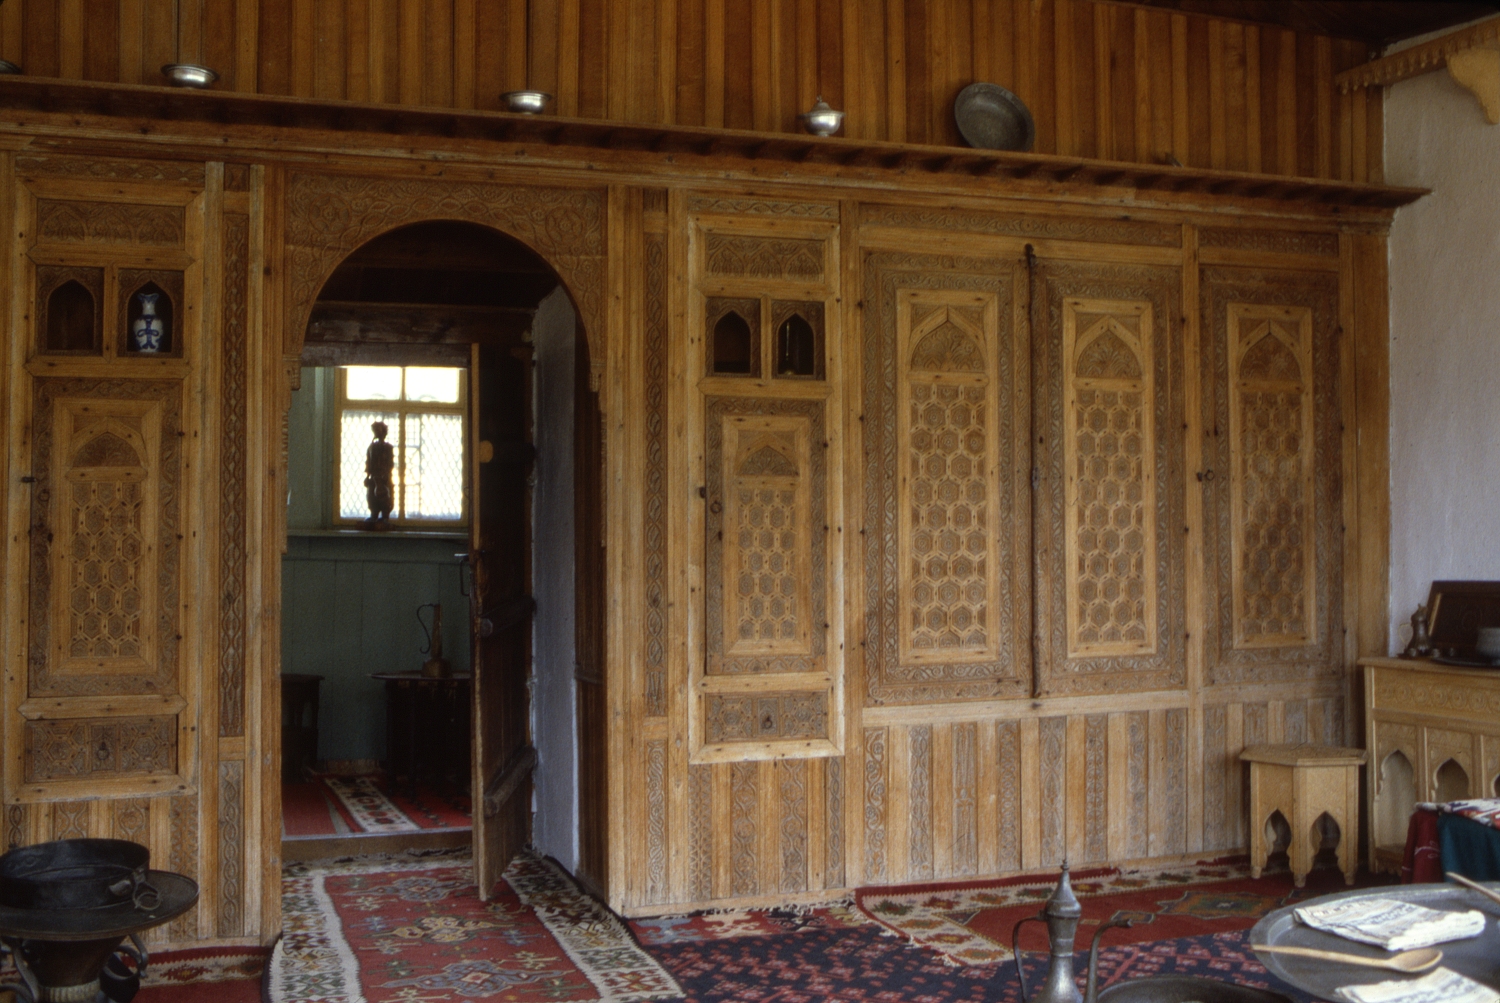 Interior view of the larger čardak, view of cabinetry